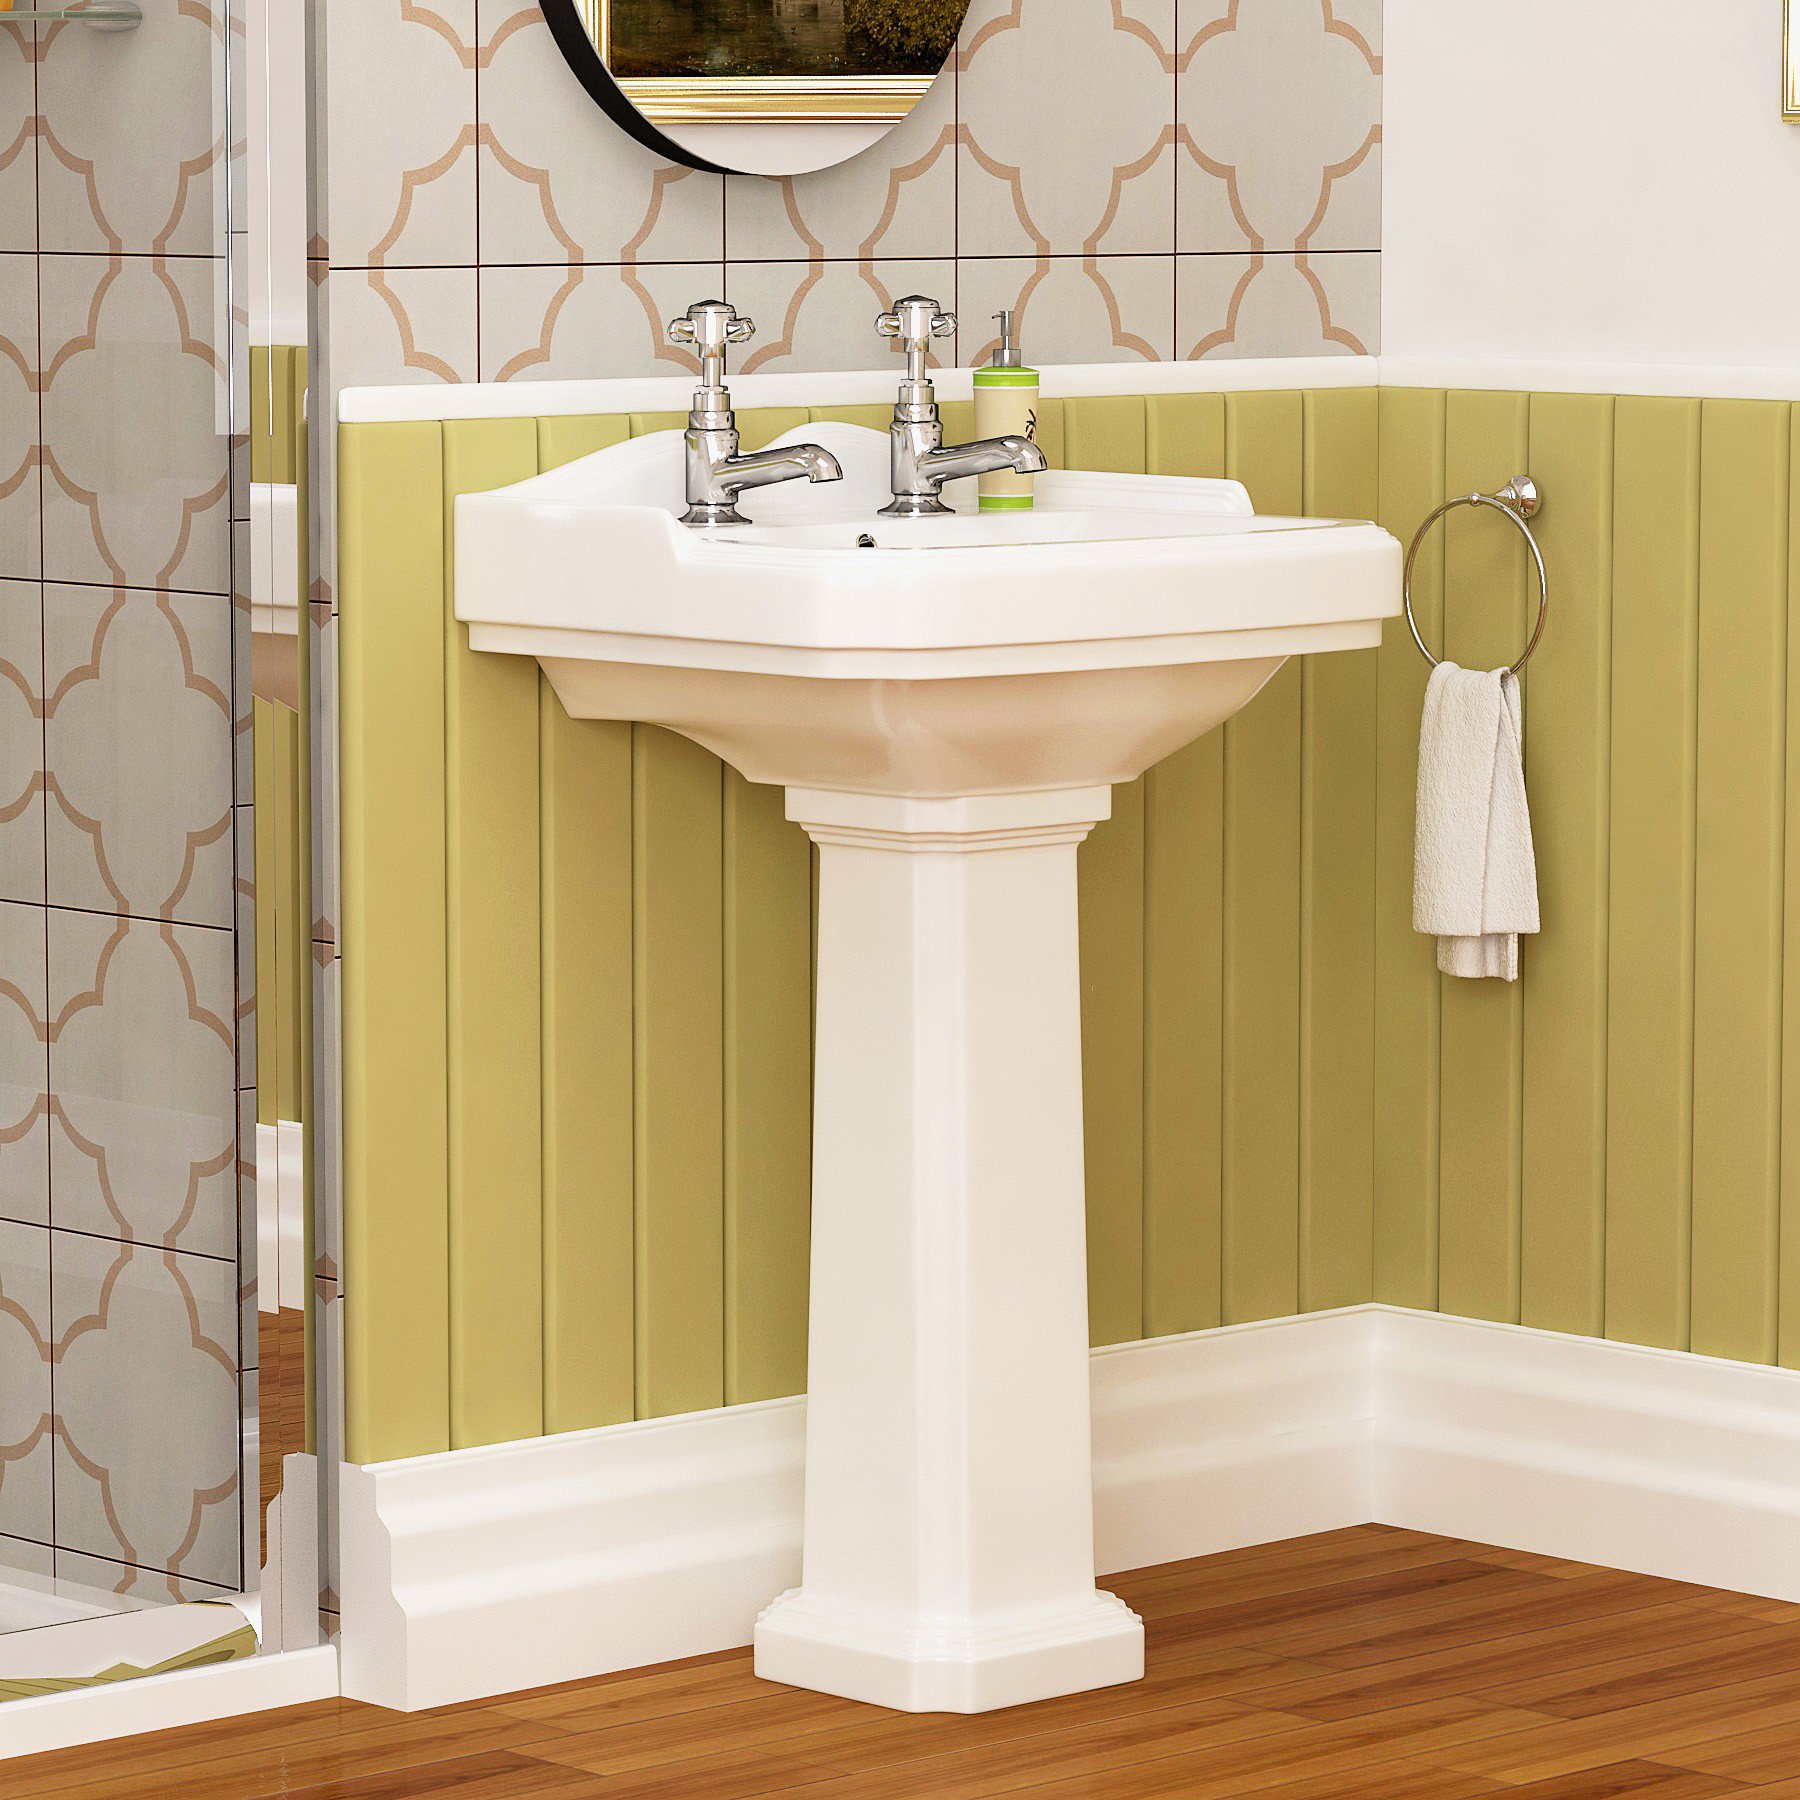 Details About Traditional Victorian Style Legend White Ceramic Bathroom Full Pedestal Basin